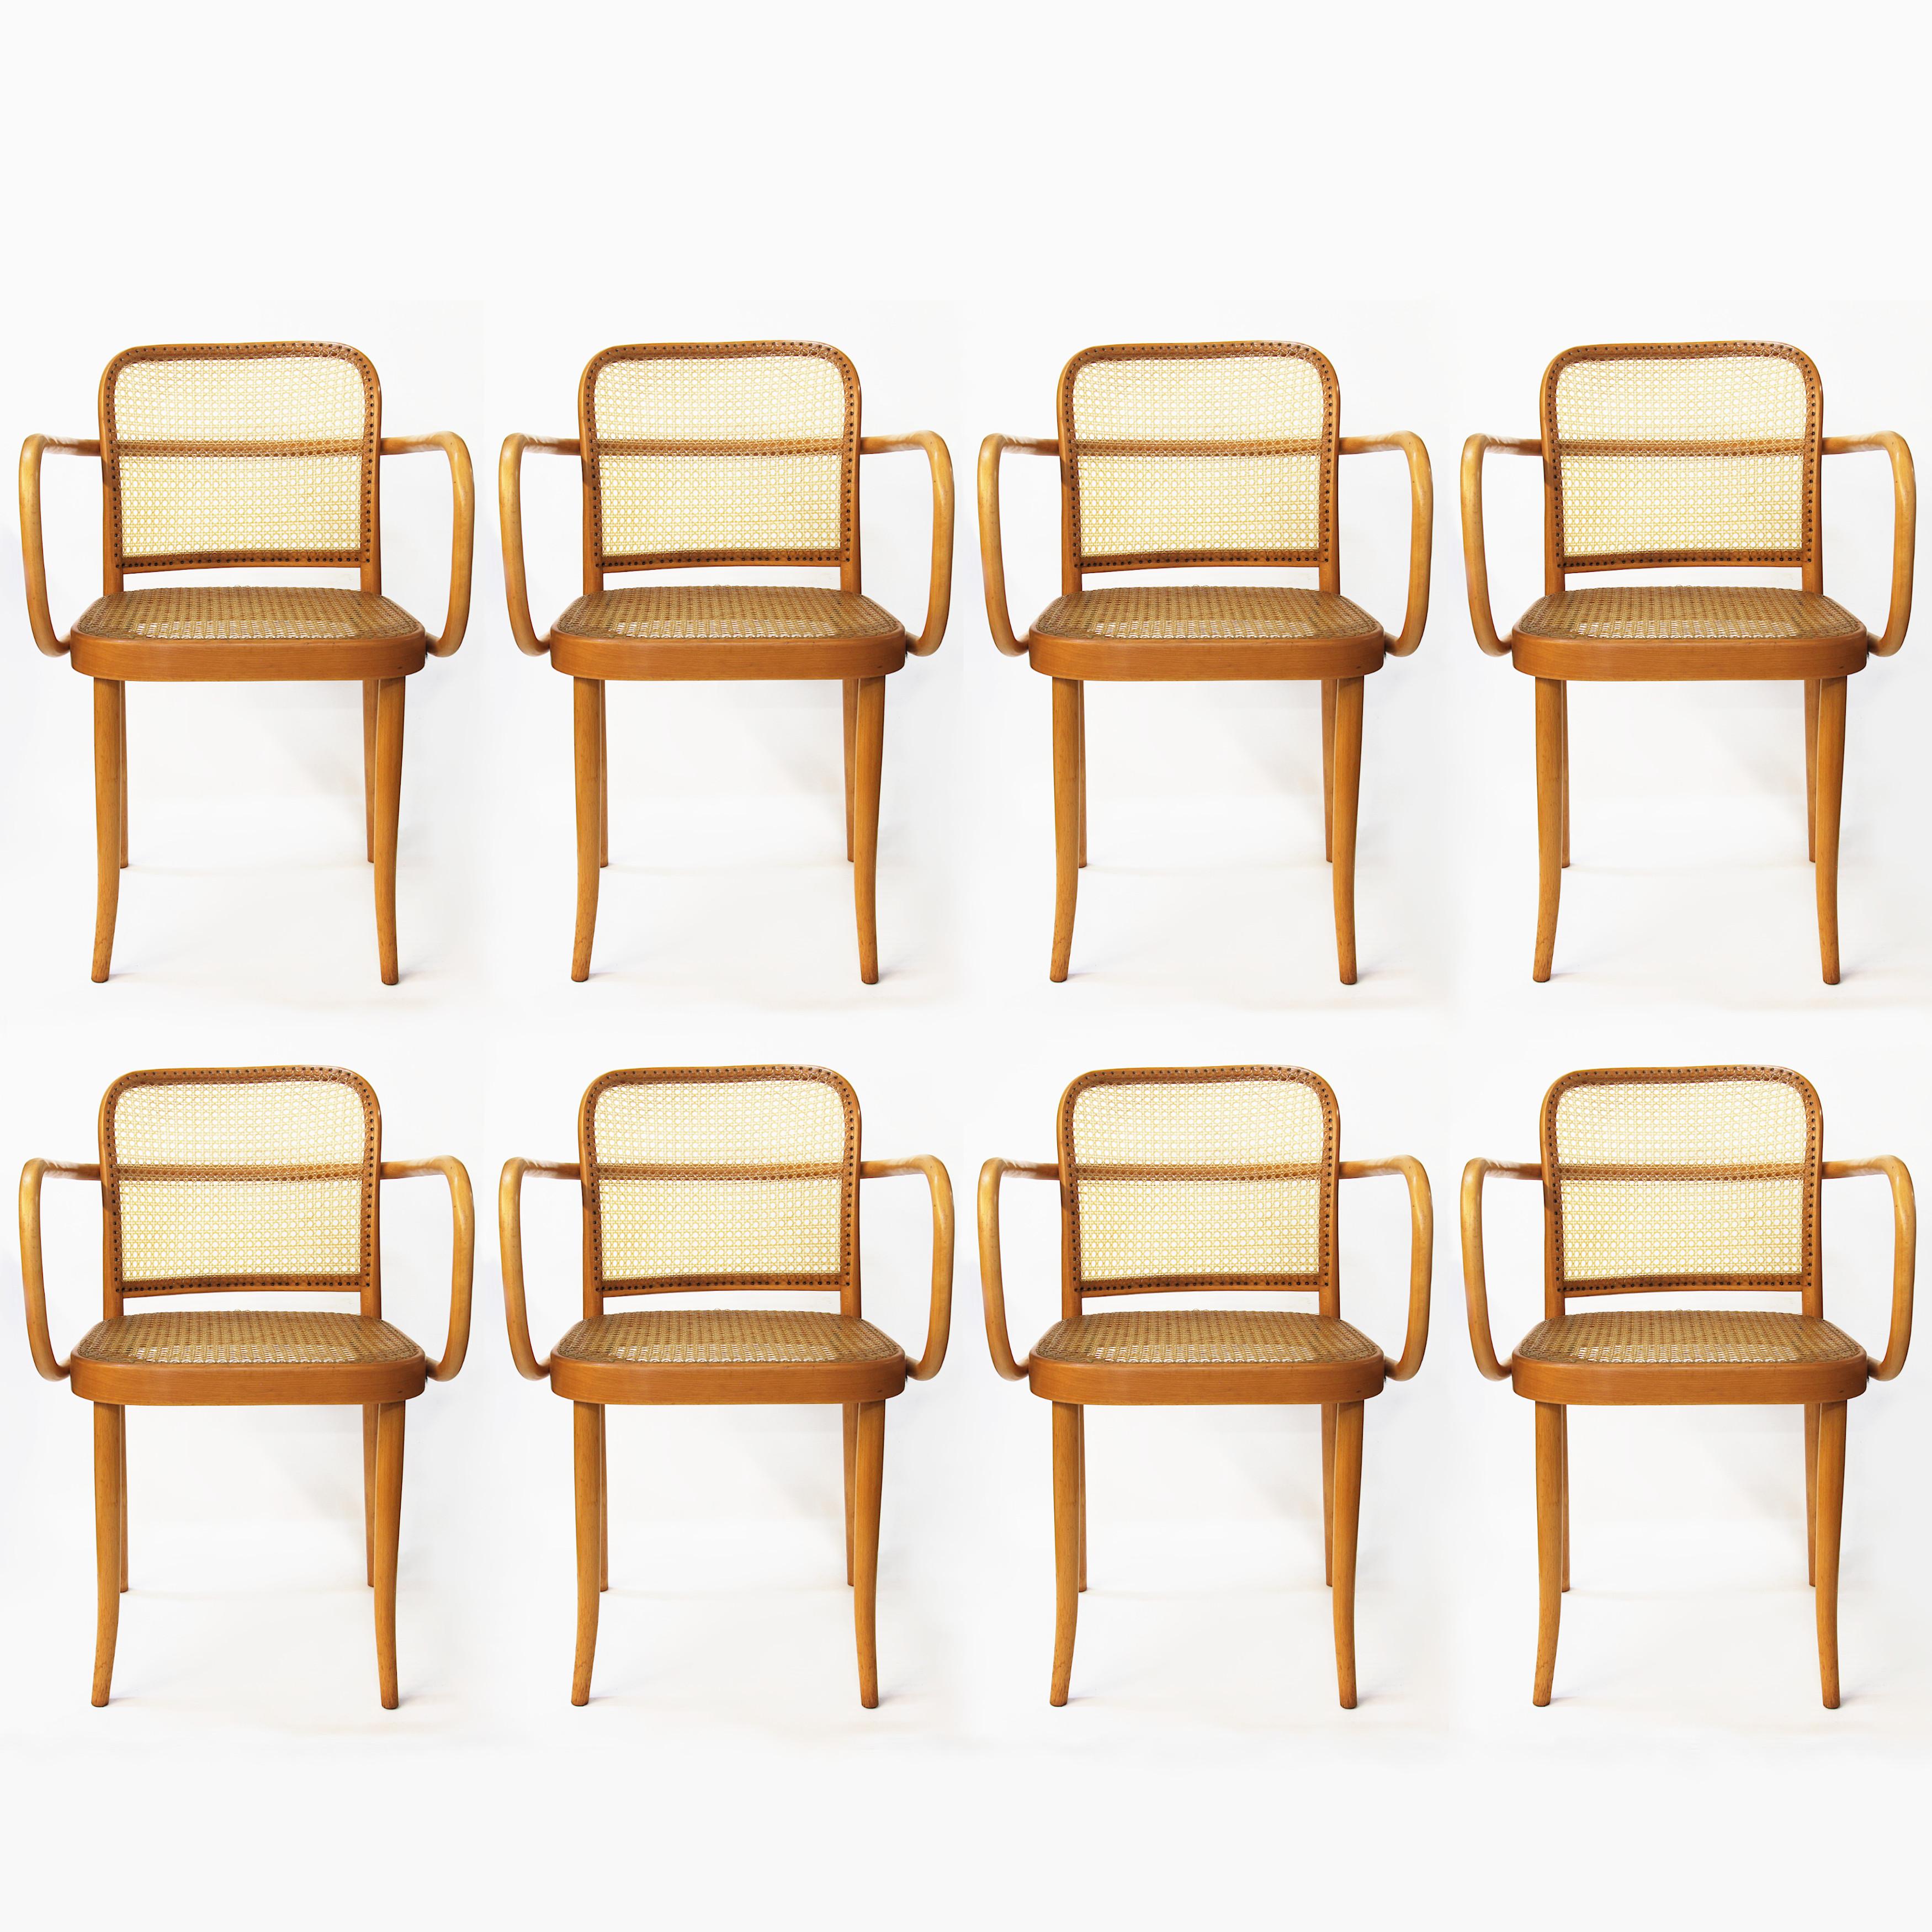 Wonderful set of eight dining chairs designed by Josef Frank and Josef Hoffmann for Stendig. Chairs feature swooping, bentwood birch frames, handwoven cane seats/backs, and that iconic Bauhaus, 